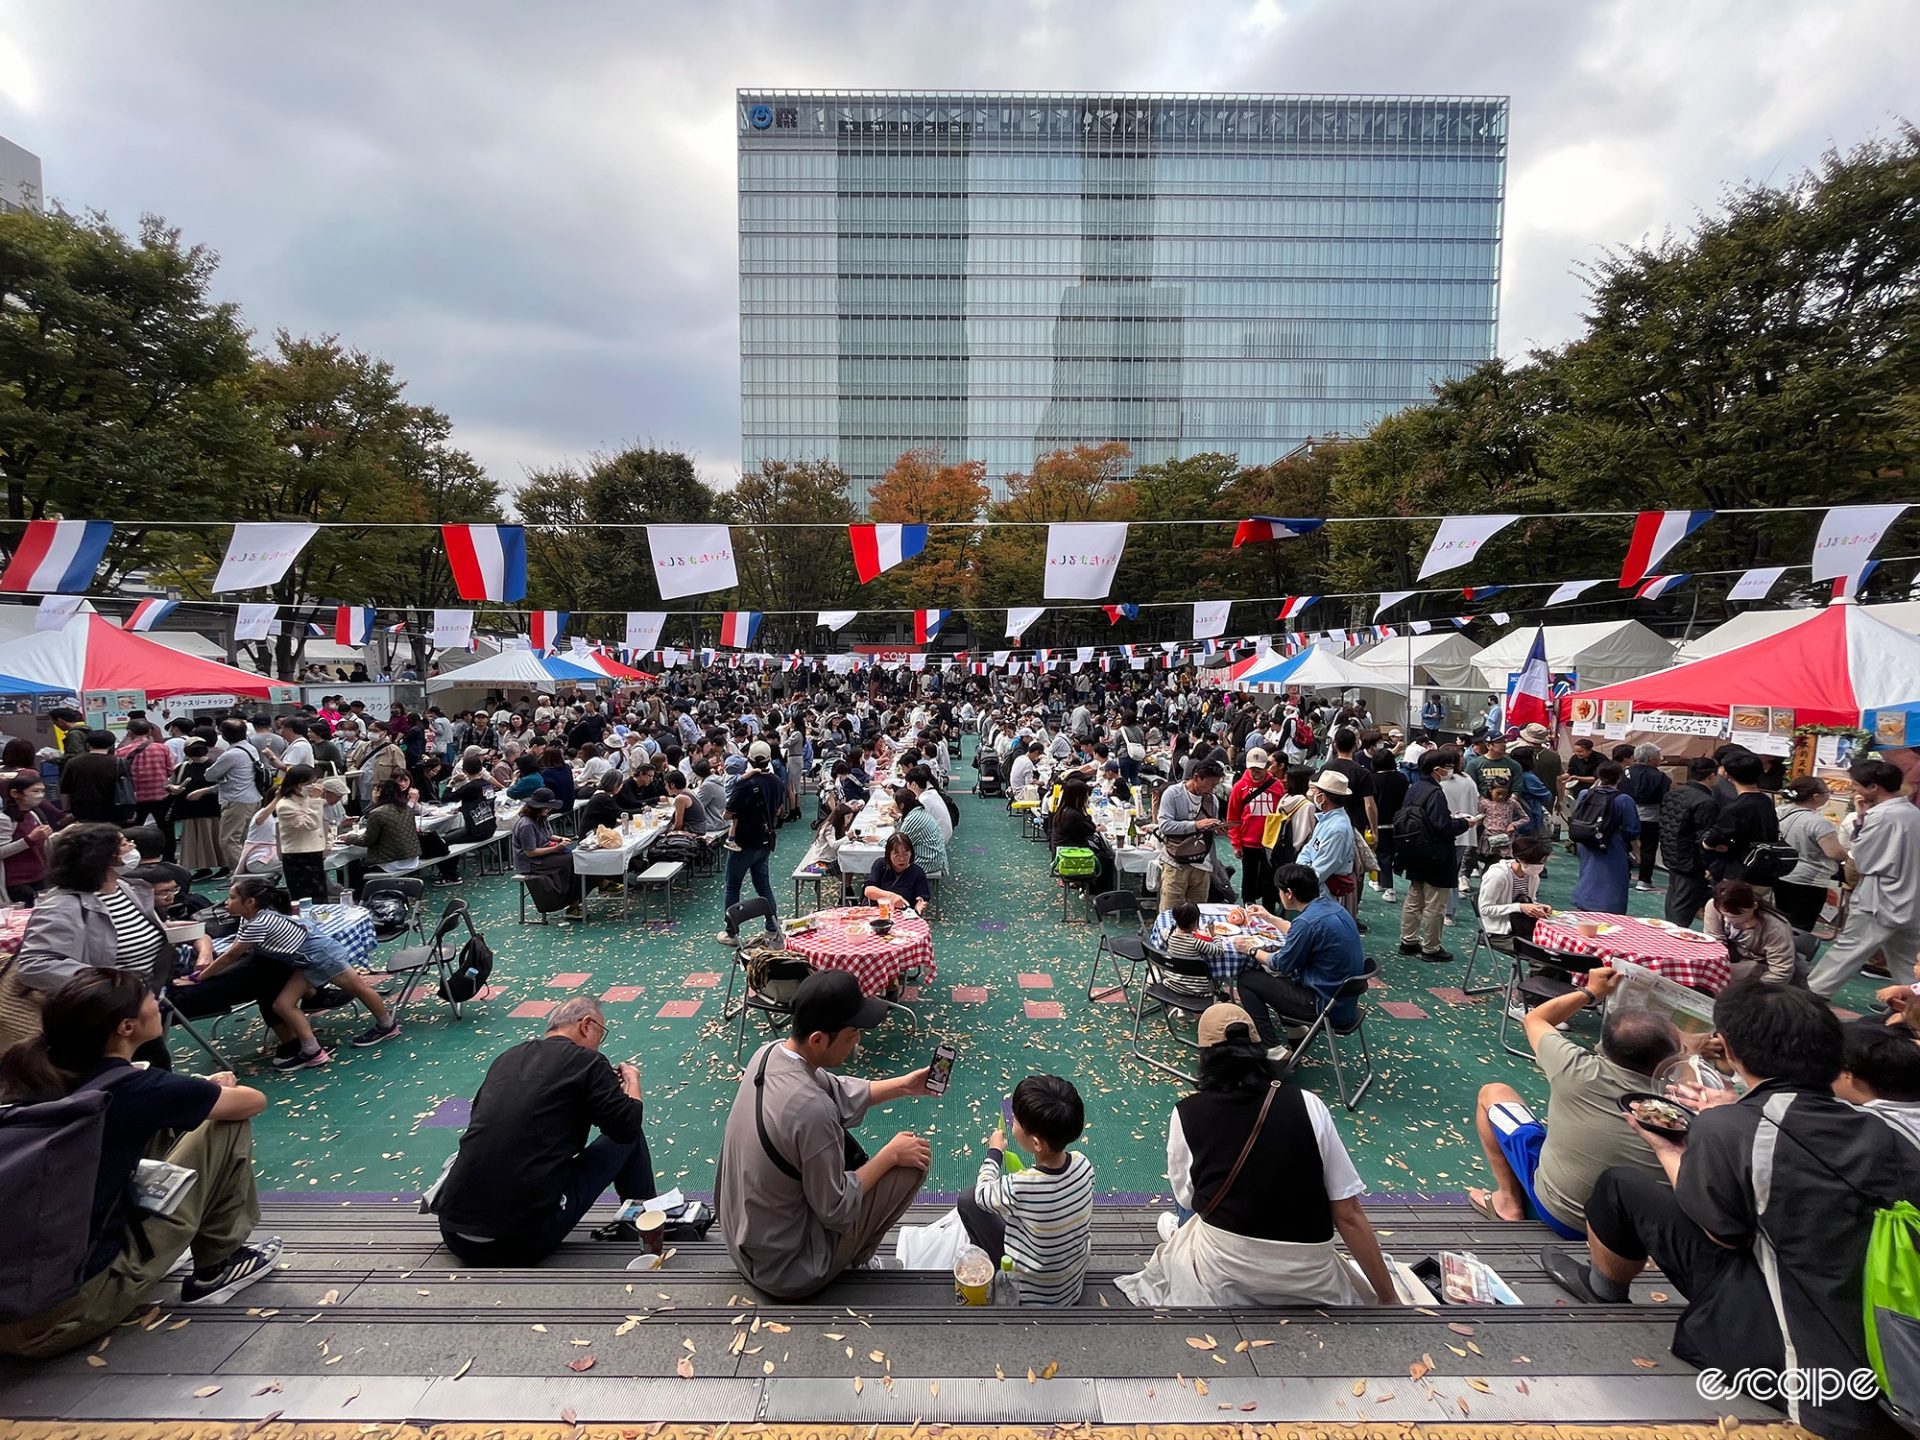 A food market decorated in French flags by Saitama station.